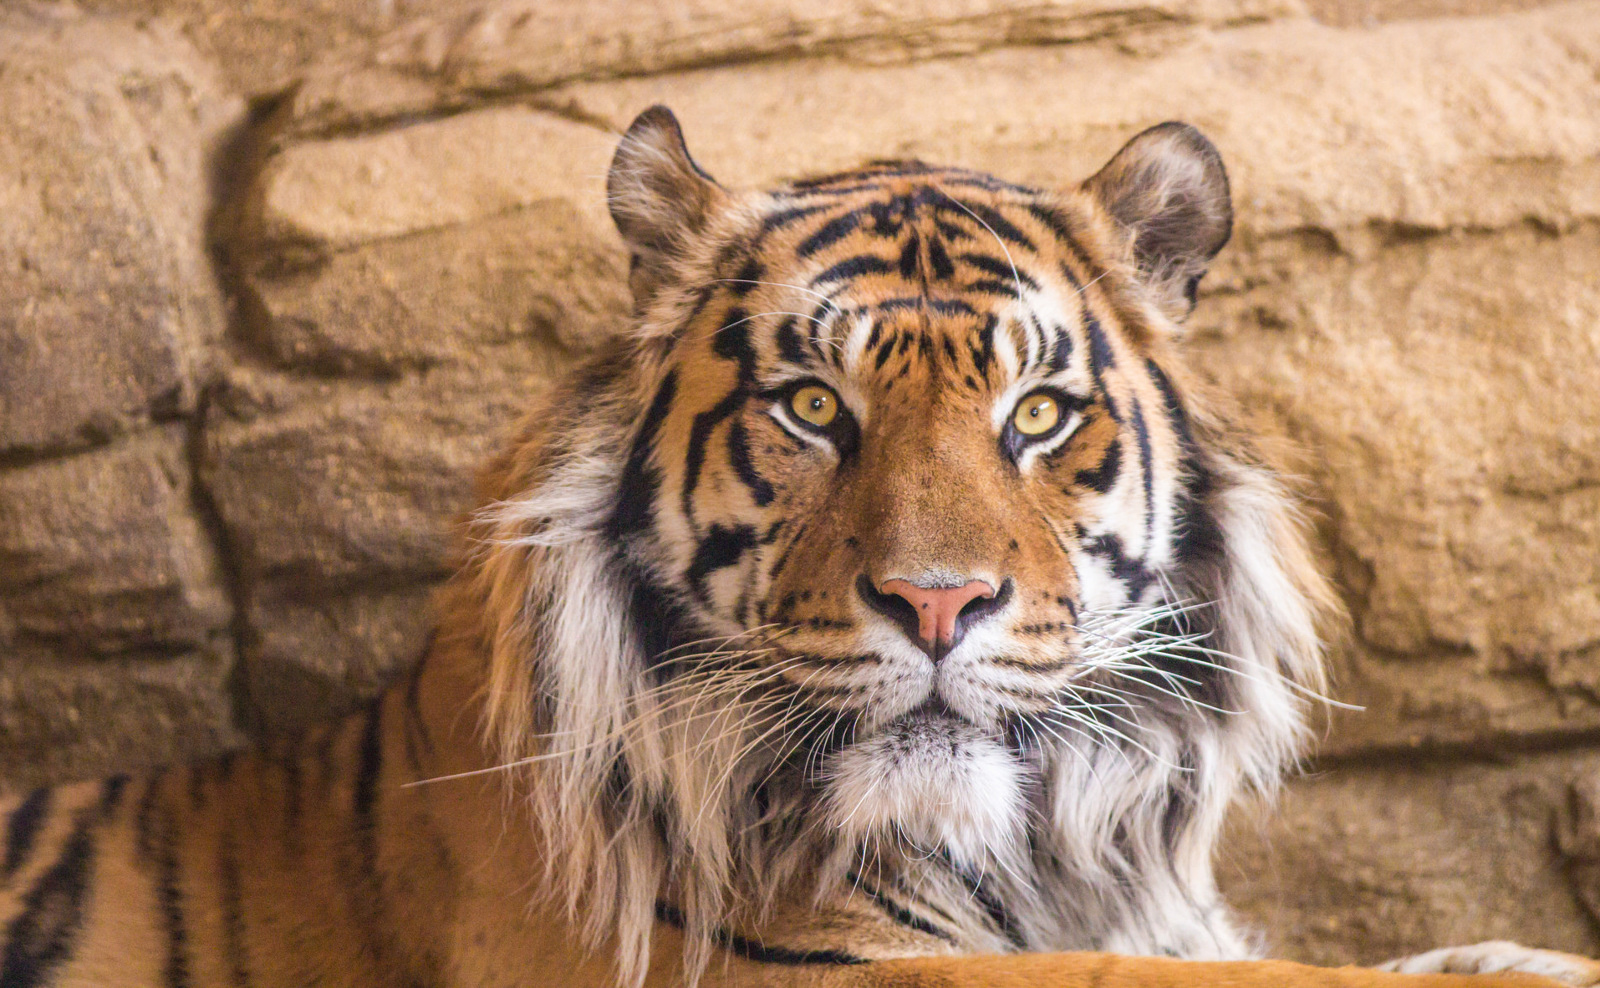 What Will Become of the Tigers Confiscated From Thailand's Cruel Tiger Temple?